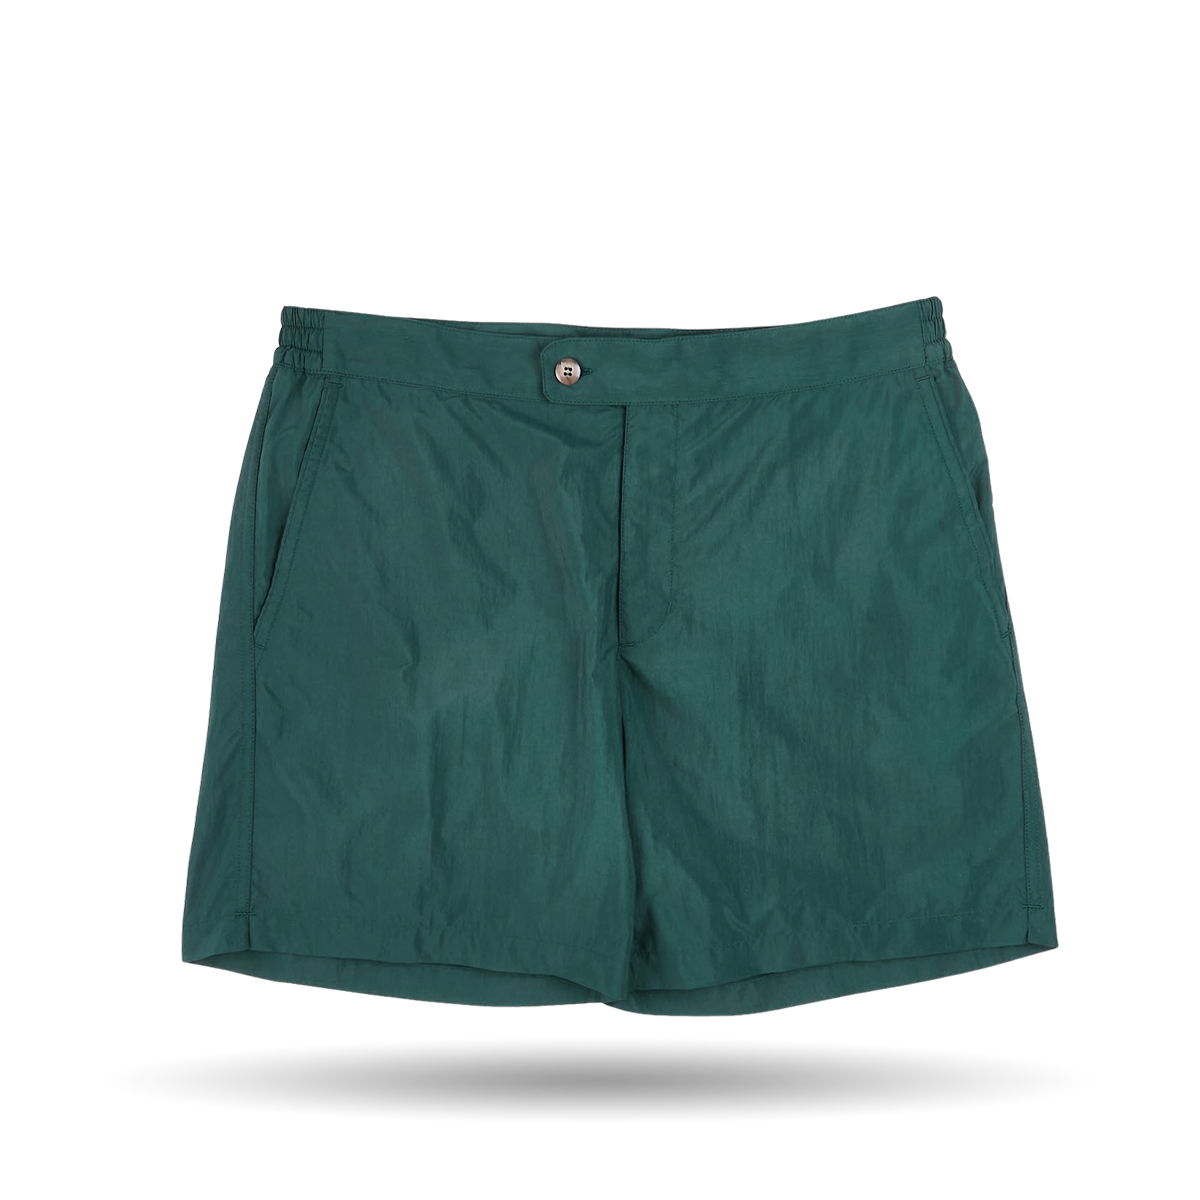 Canali Petrol Green Microfiber Tailored Swimshorts Front